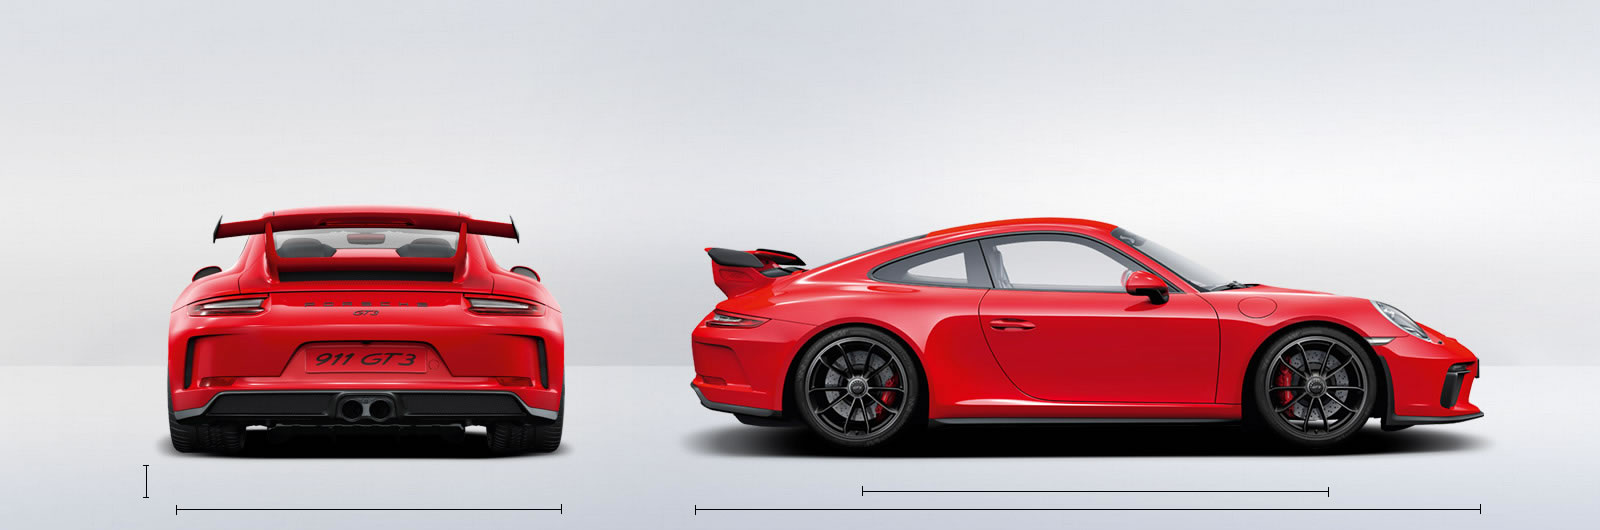 911 GT3 Specifications